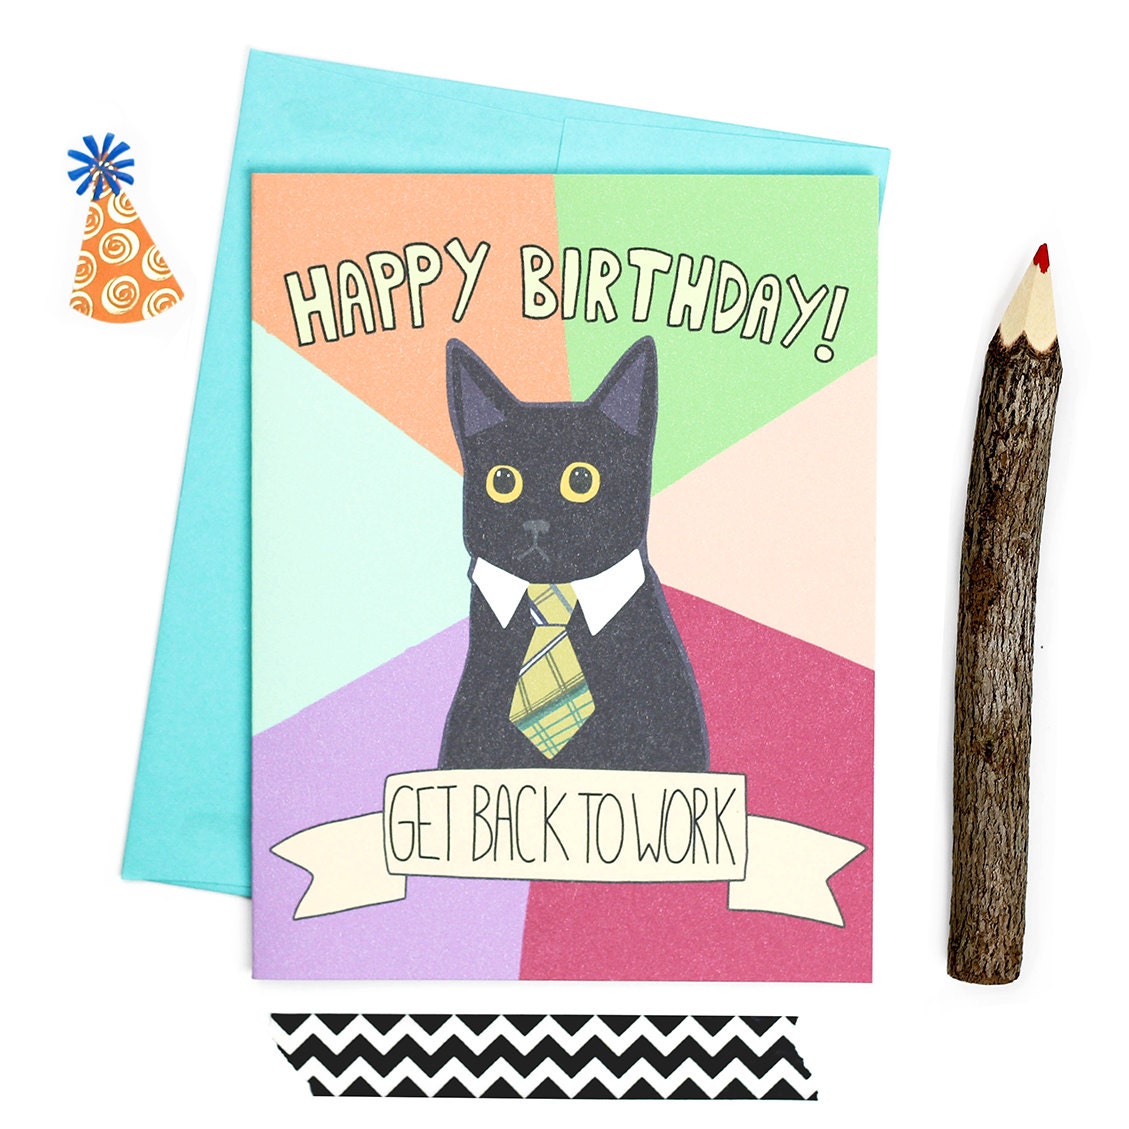 Funny Birthday Card Business Cat Meme Funny by TurtlesSoup